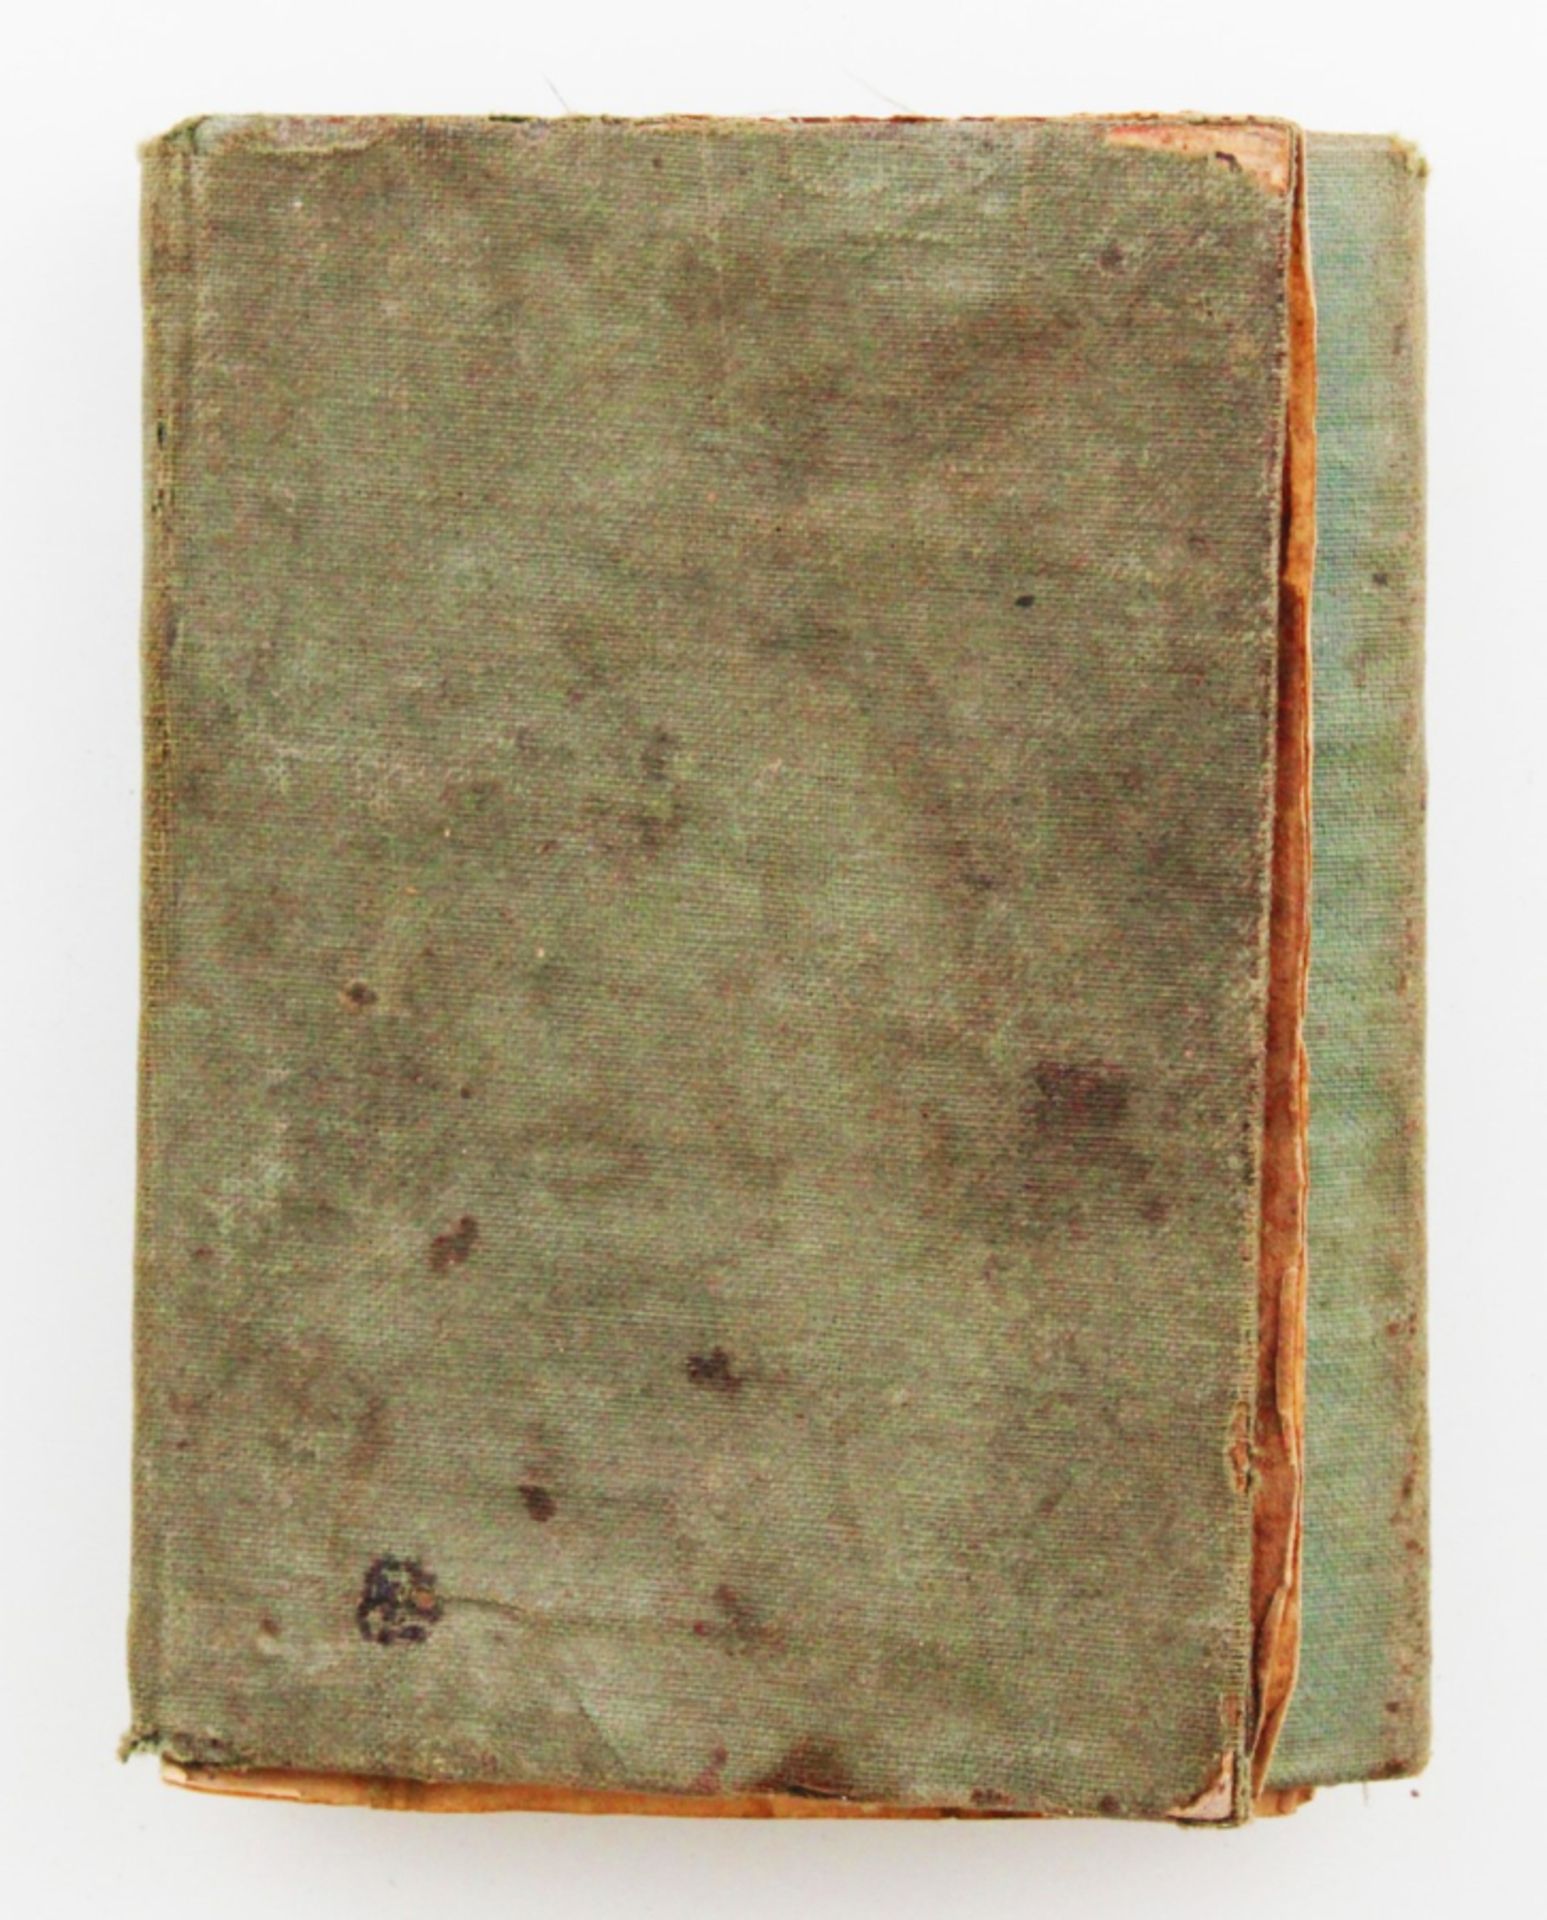 A 18th century Ottoman book with suras and prayers - Image 11 of 12